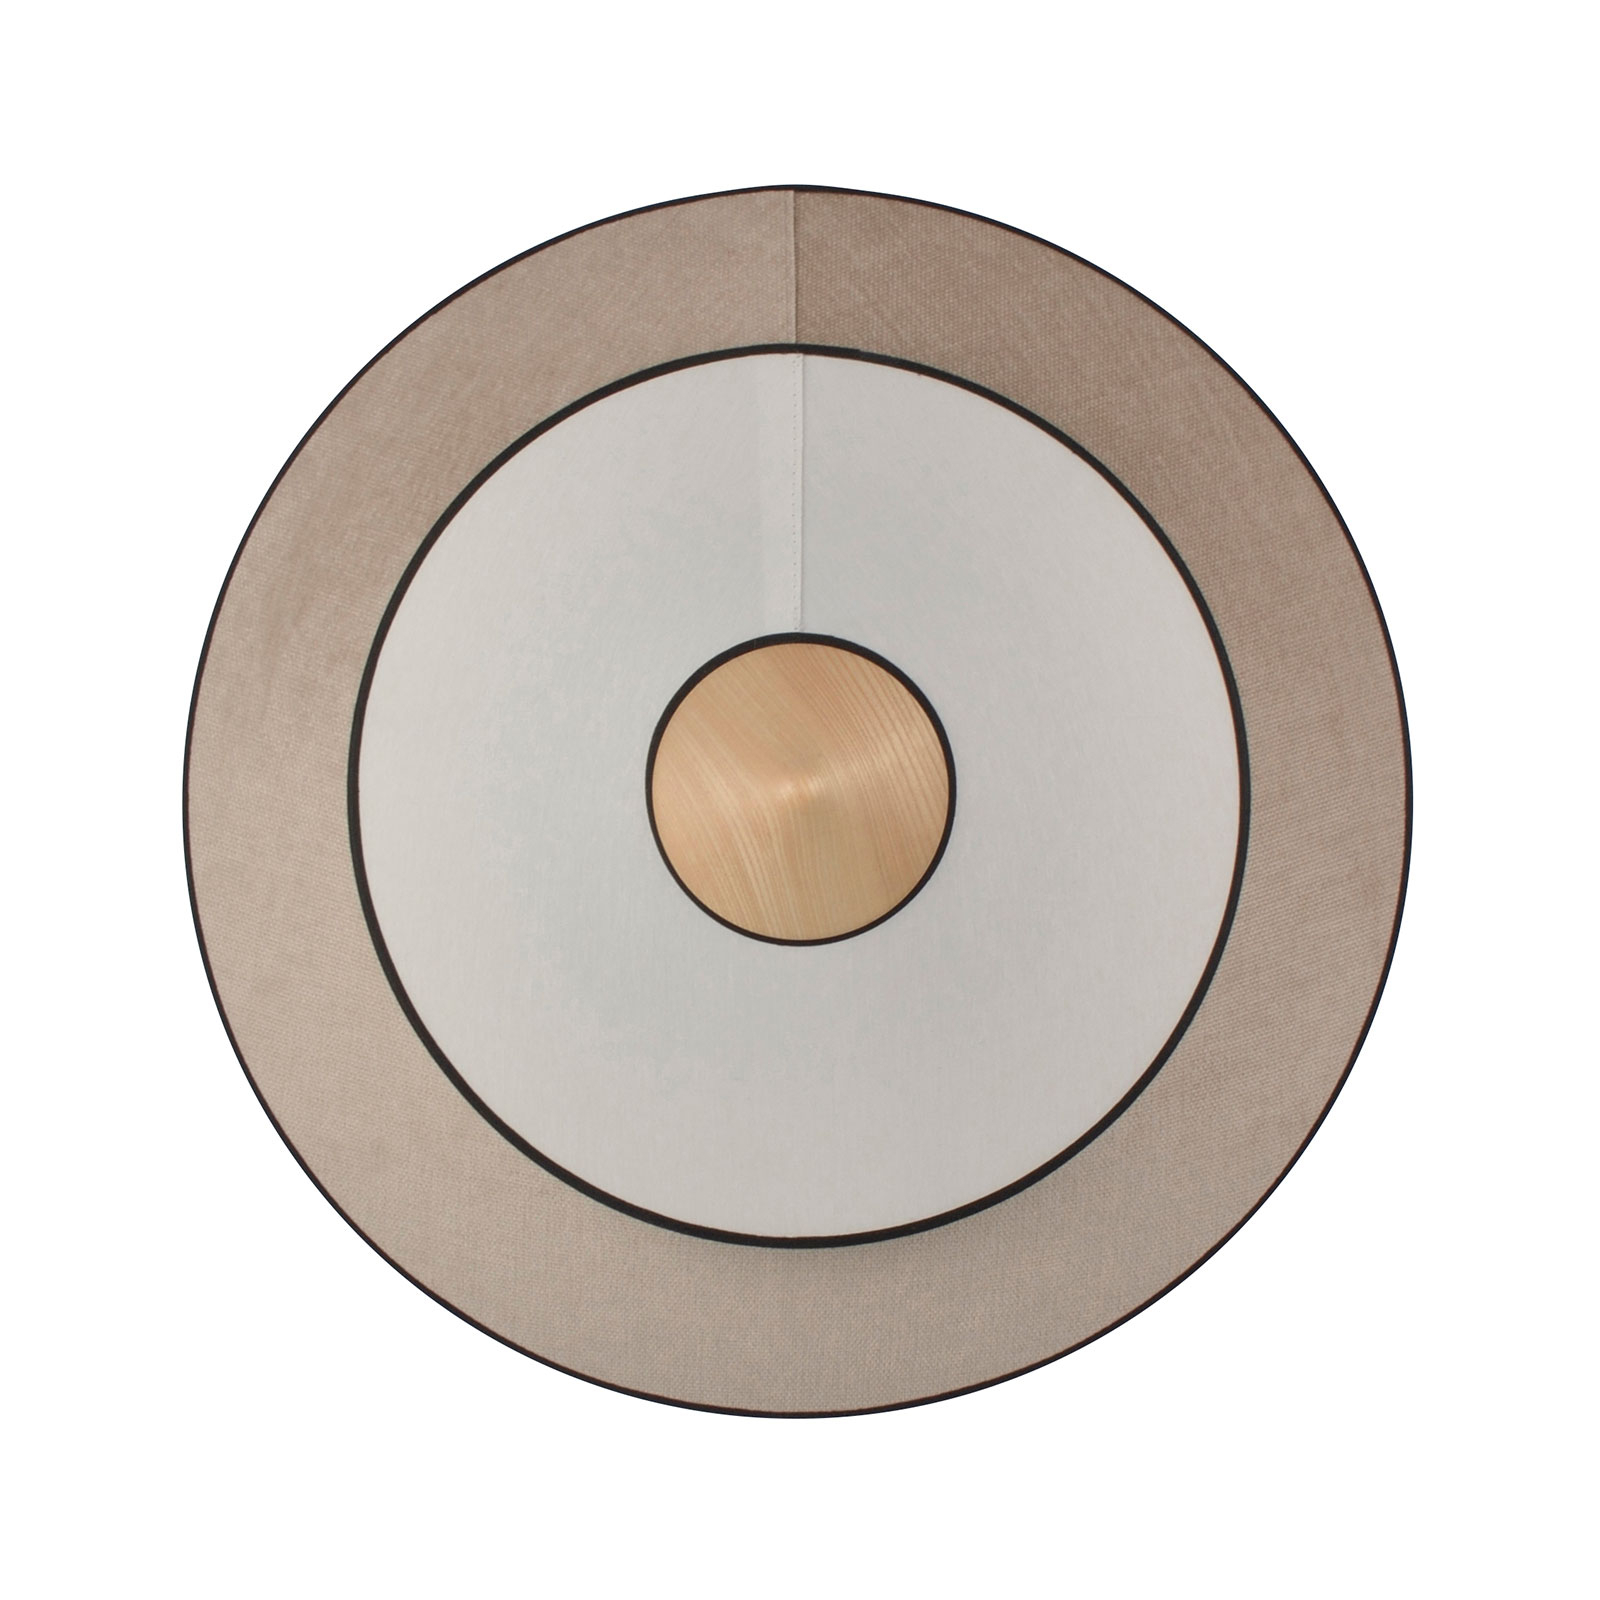 Forestier Cymbal S LED wall light, natural